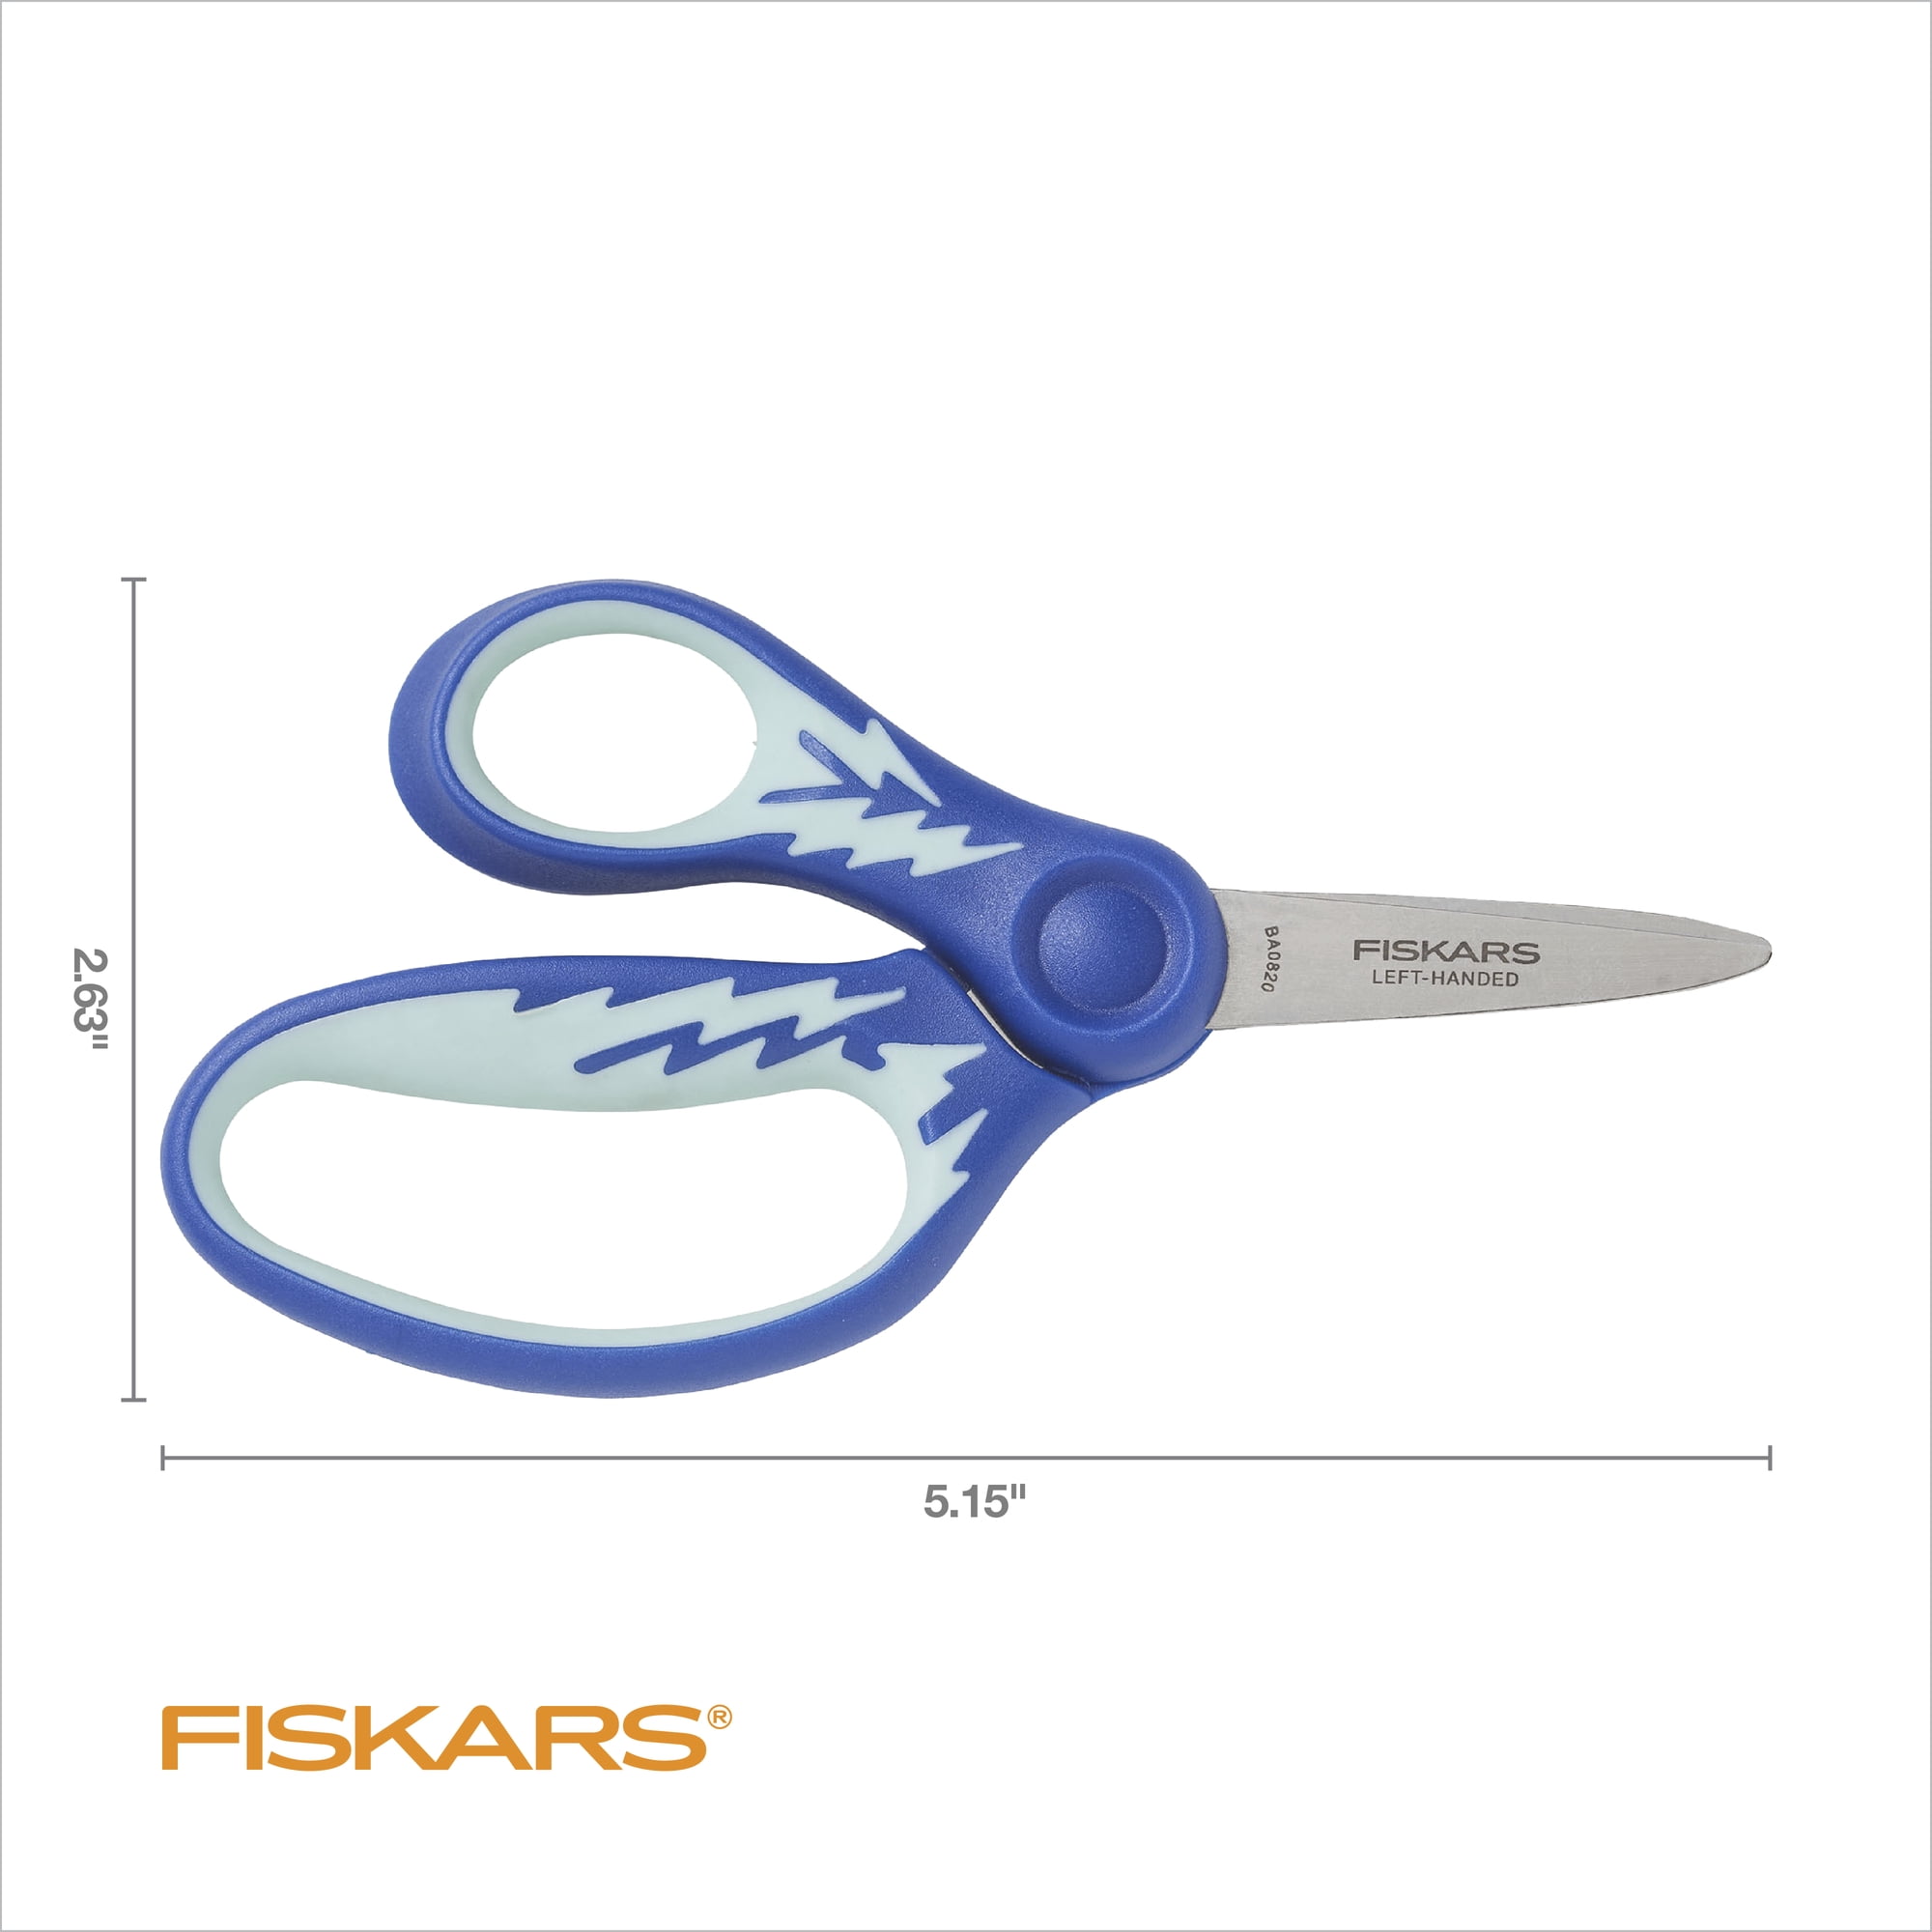 Fiskers Left or Right Handed Scissor - The Peppermill